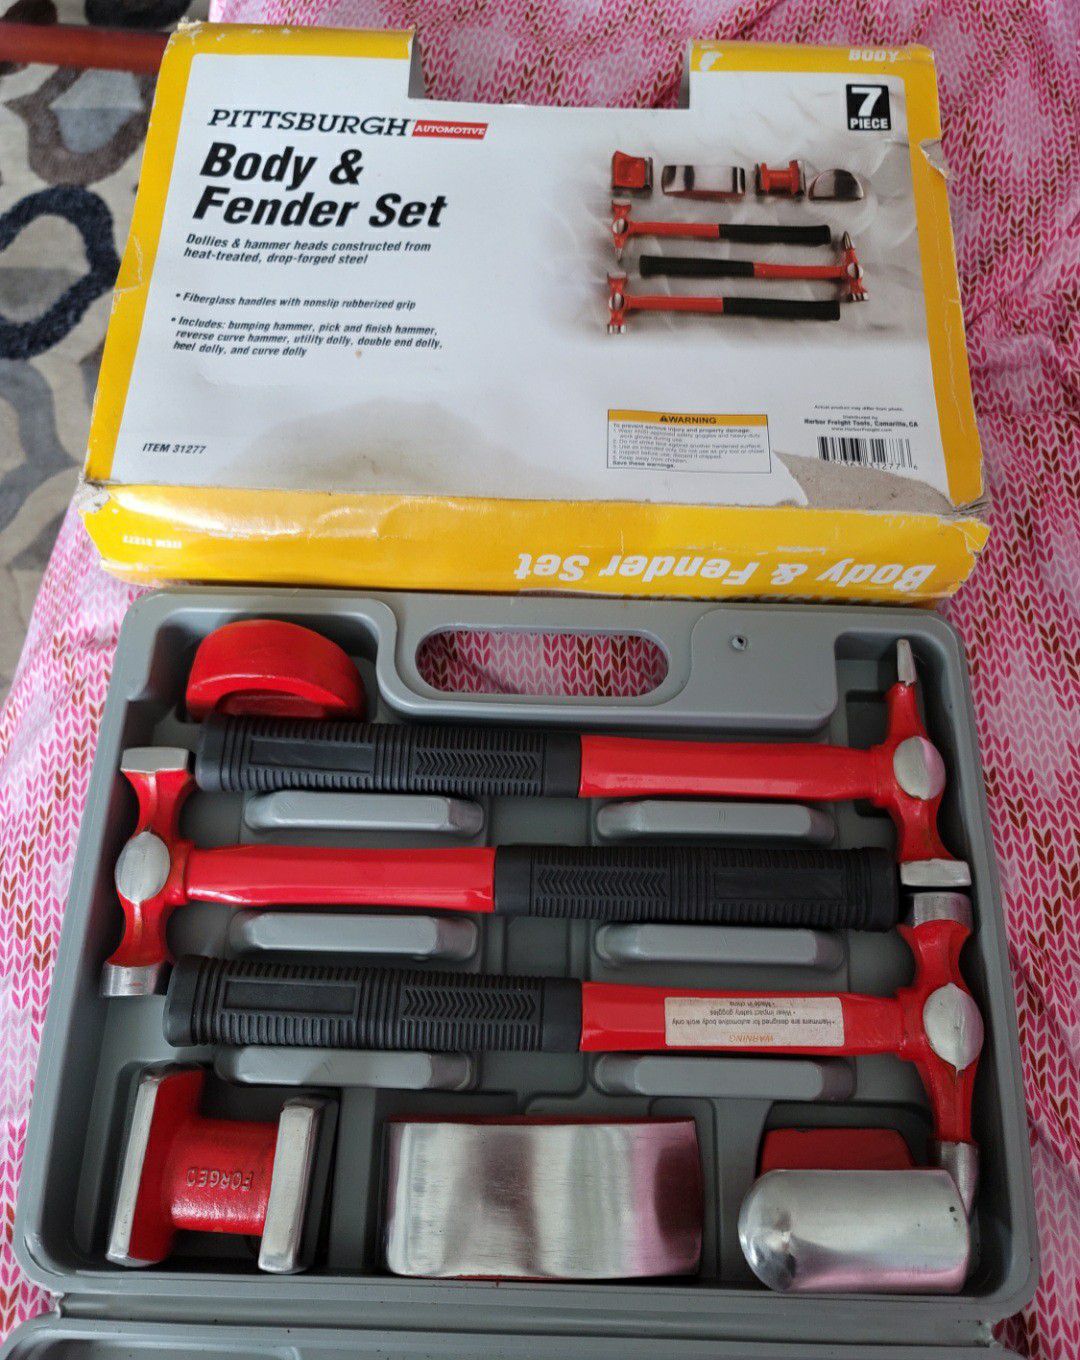 Body and Fender 7 piece tool set